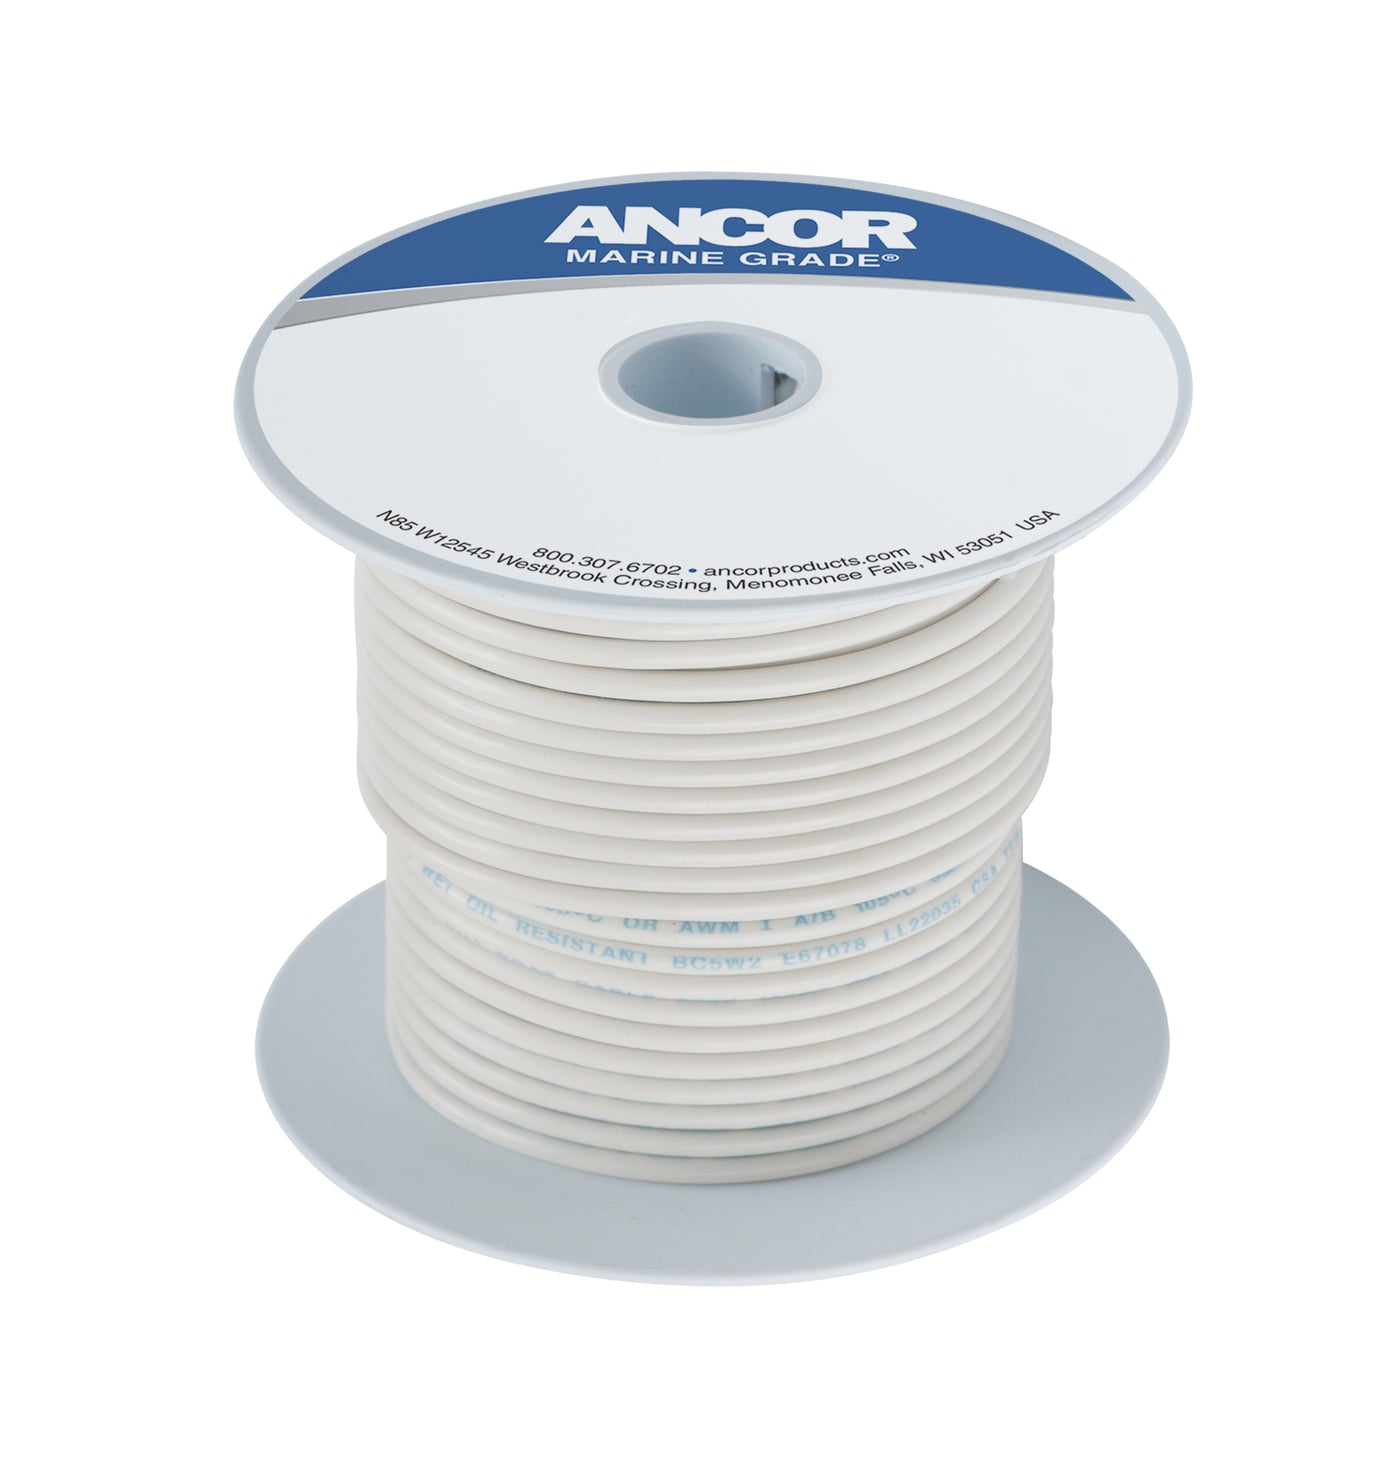 Ancor 112710 Tinned Copper Wire, 6 AWG (13mm²), White - 100ft